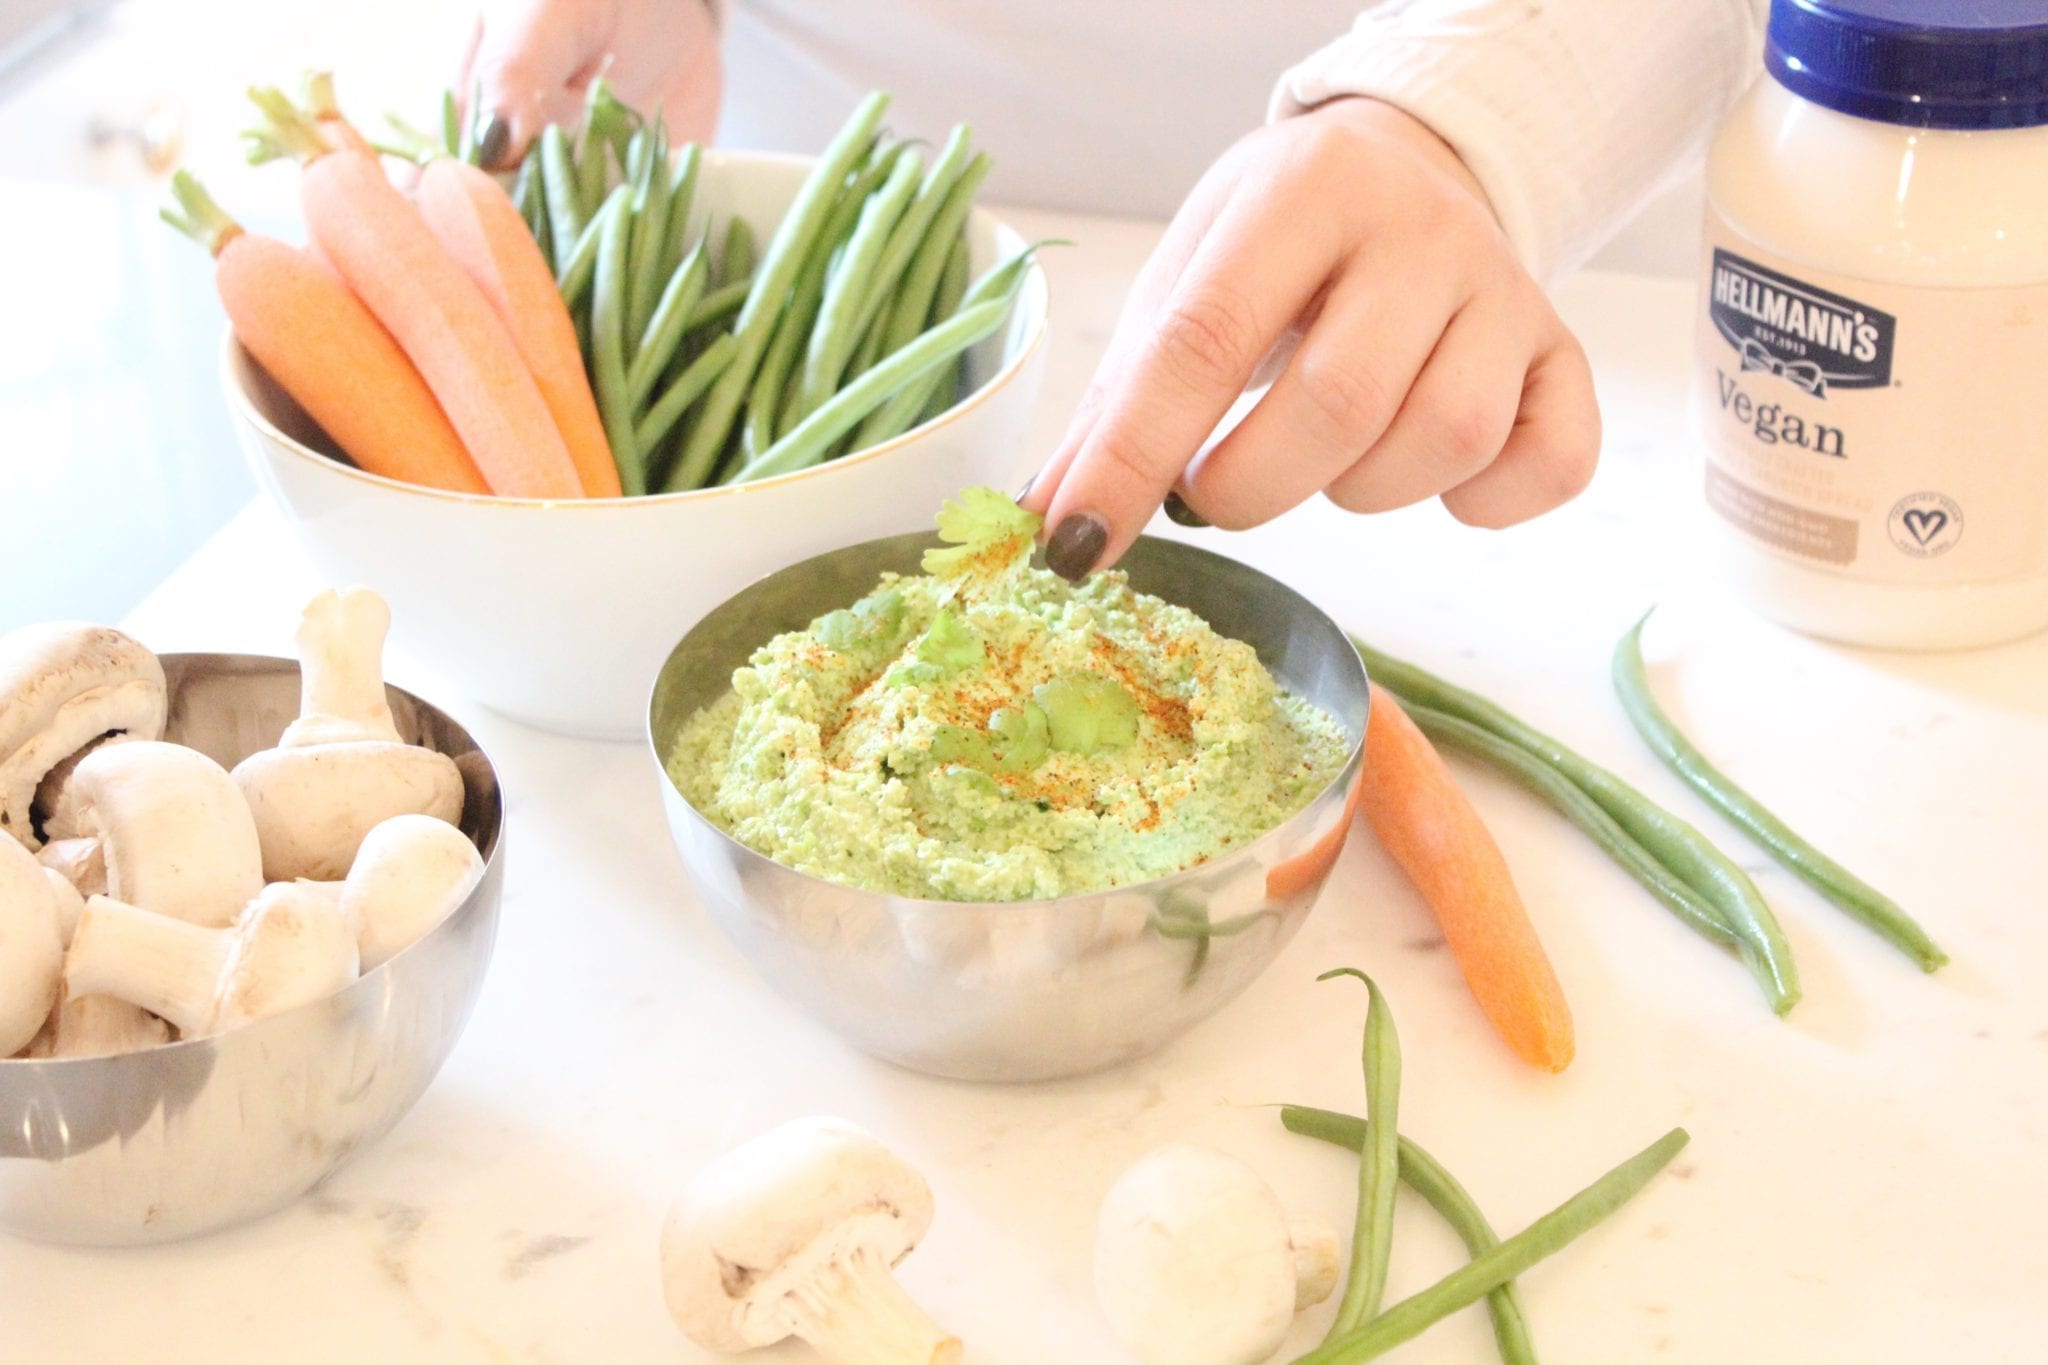 Looking for a party dip that is healthy while still being delicious? This Spicy Hummus Dip is perfect for everyone!